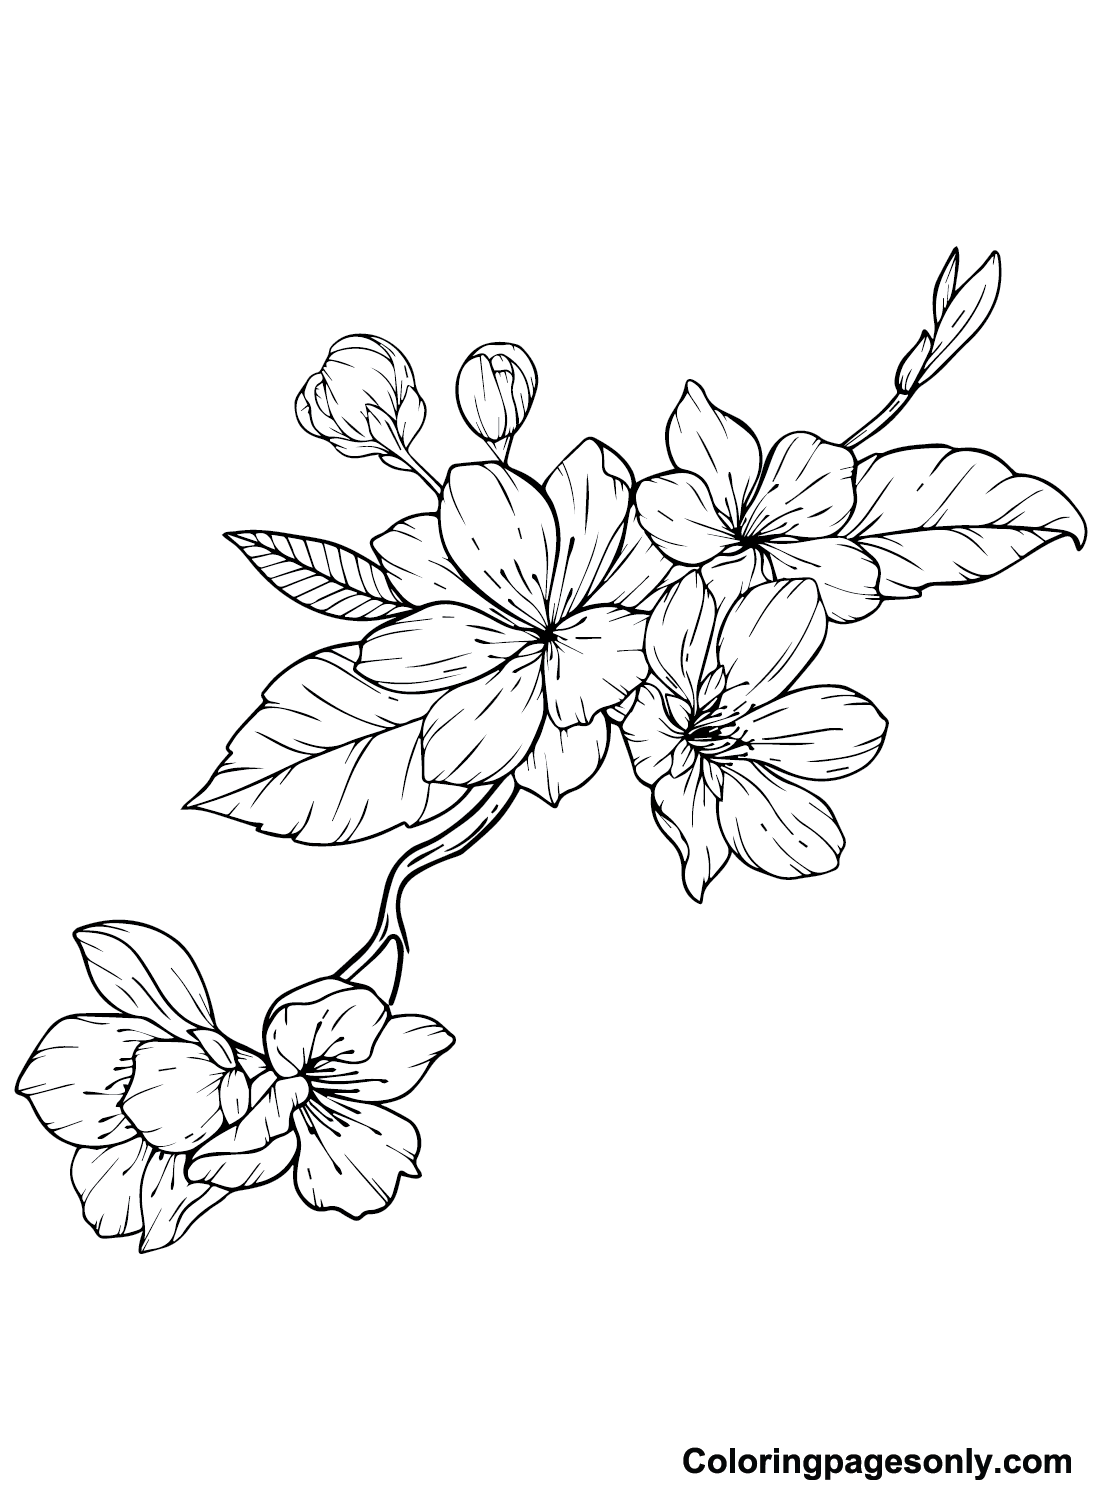 White Cherry Blossom Coloring Pages